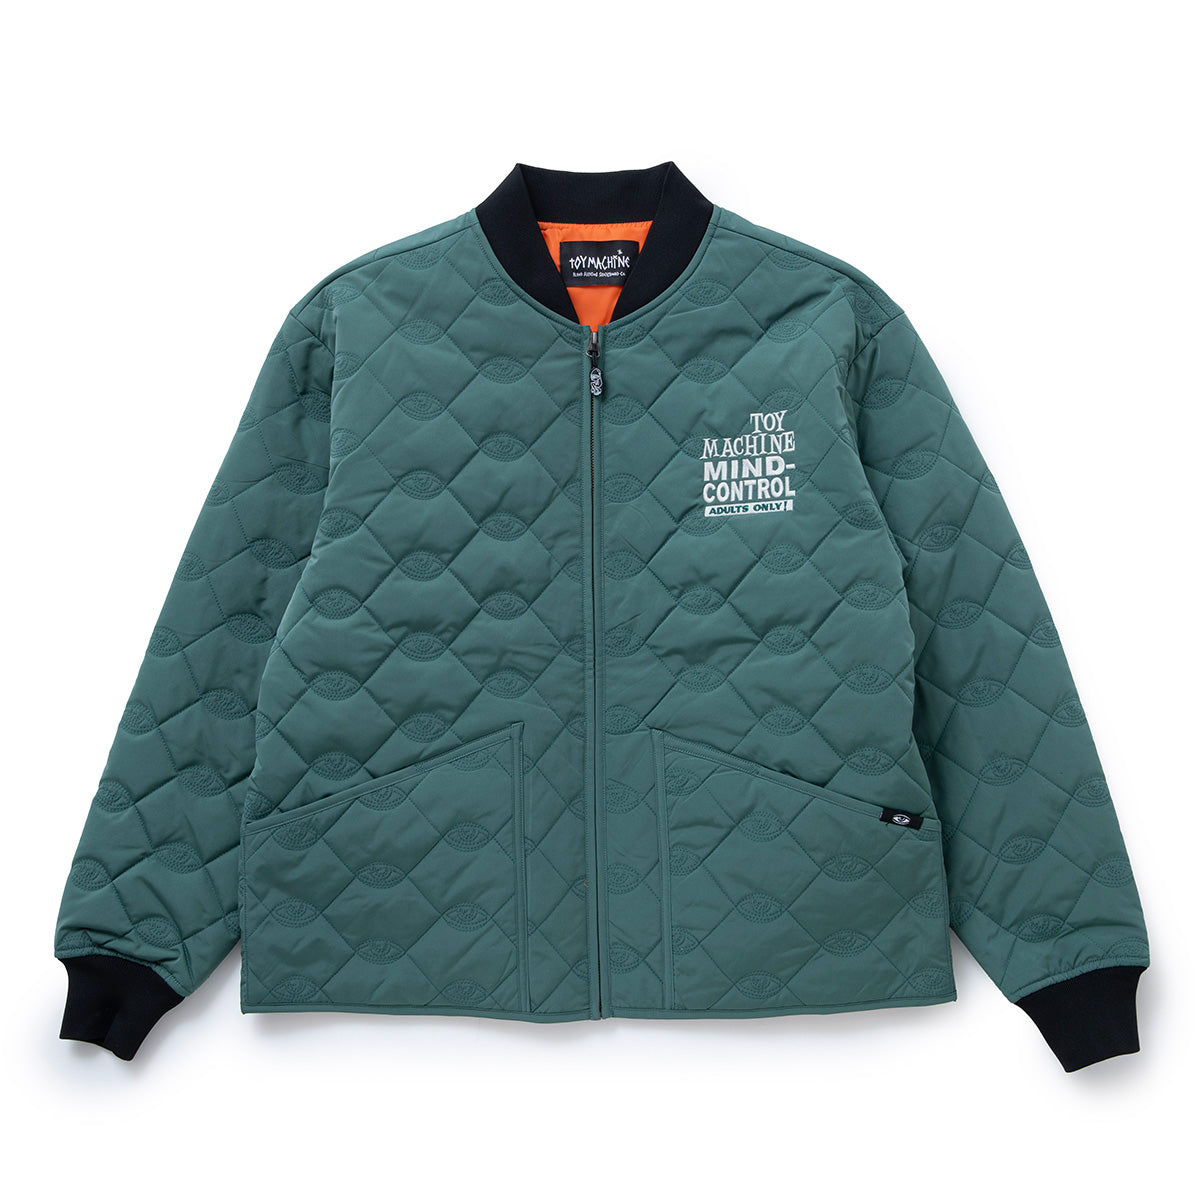 SECT EYE STITCH QUILTED BOMBER JACKET